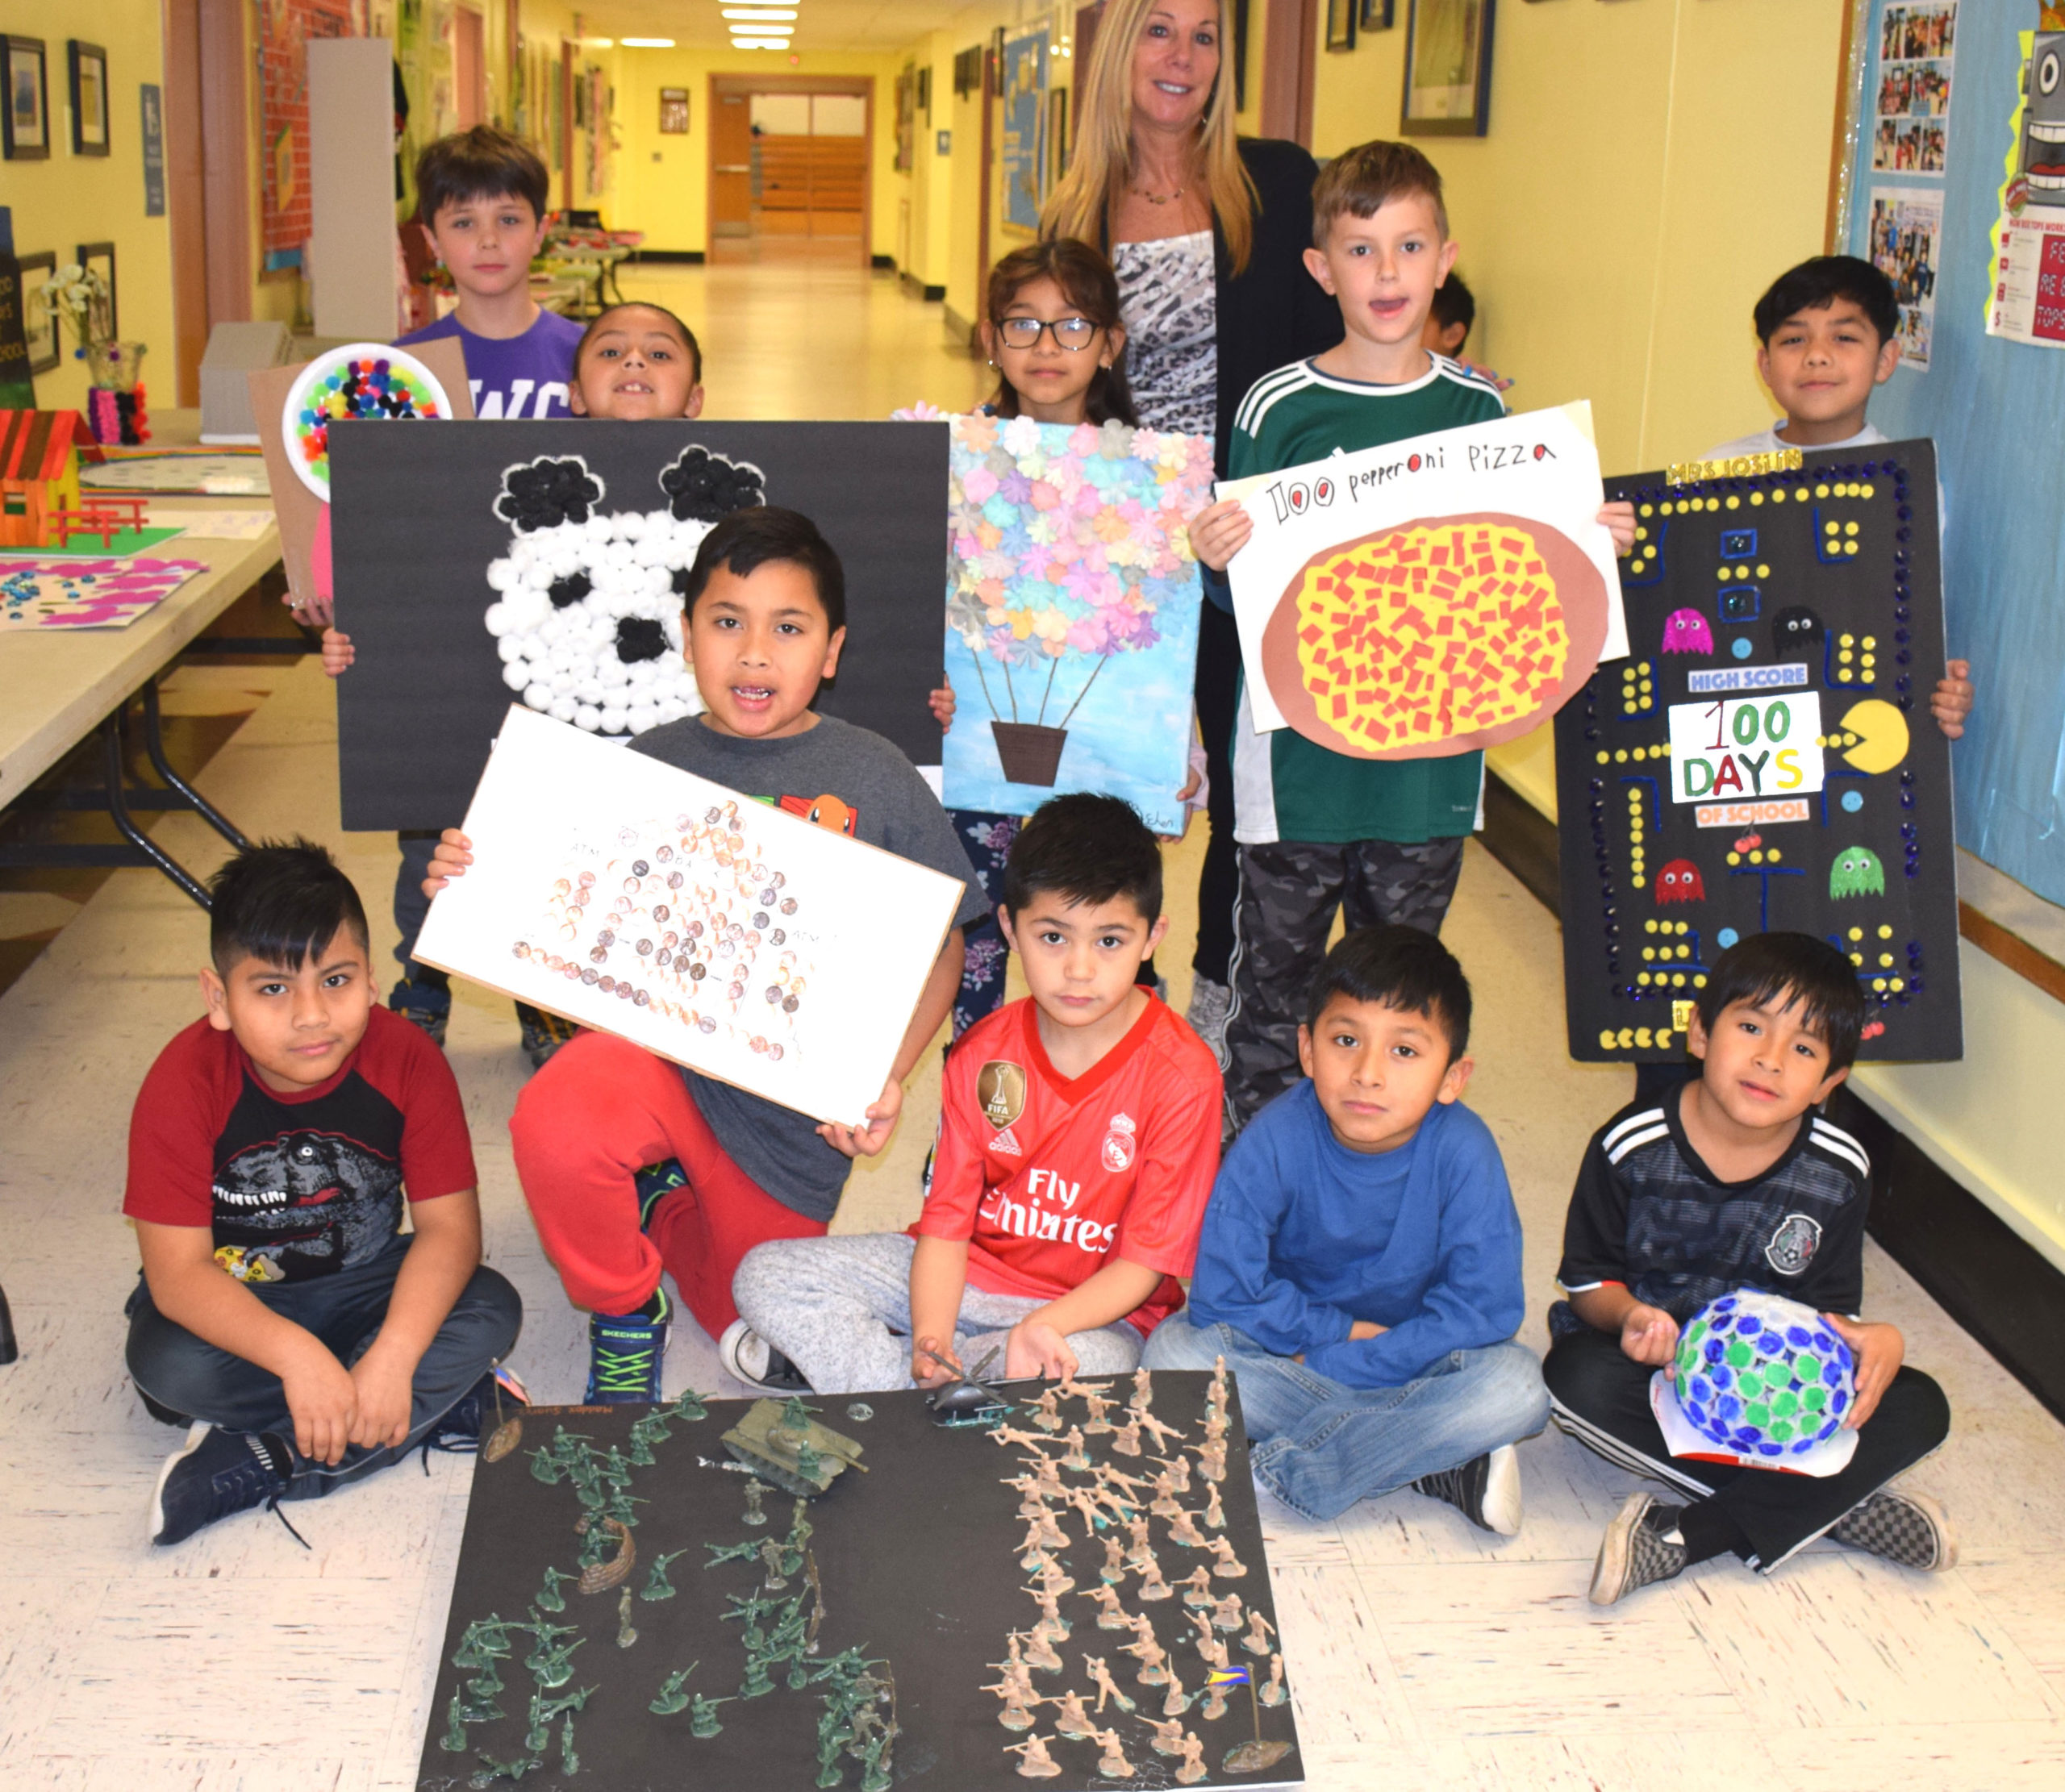 Second-graders at Hampton Bays Elementary School marked 100 days of school by creating colorful and creative projects. Each project included 100 items of the student’s choosing.